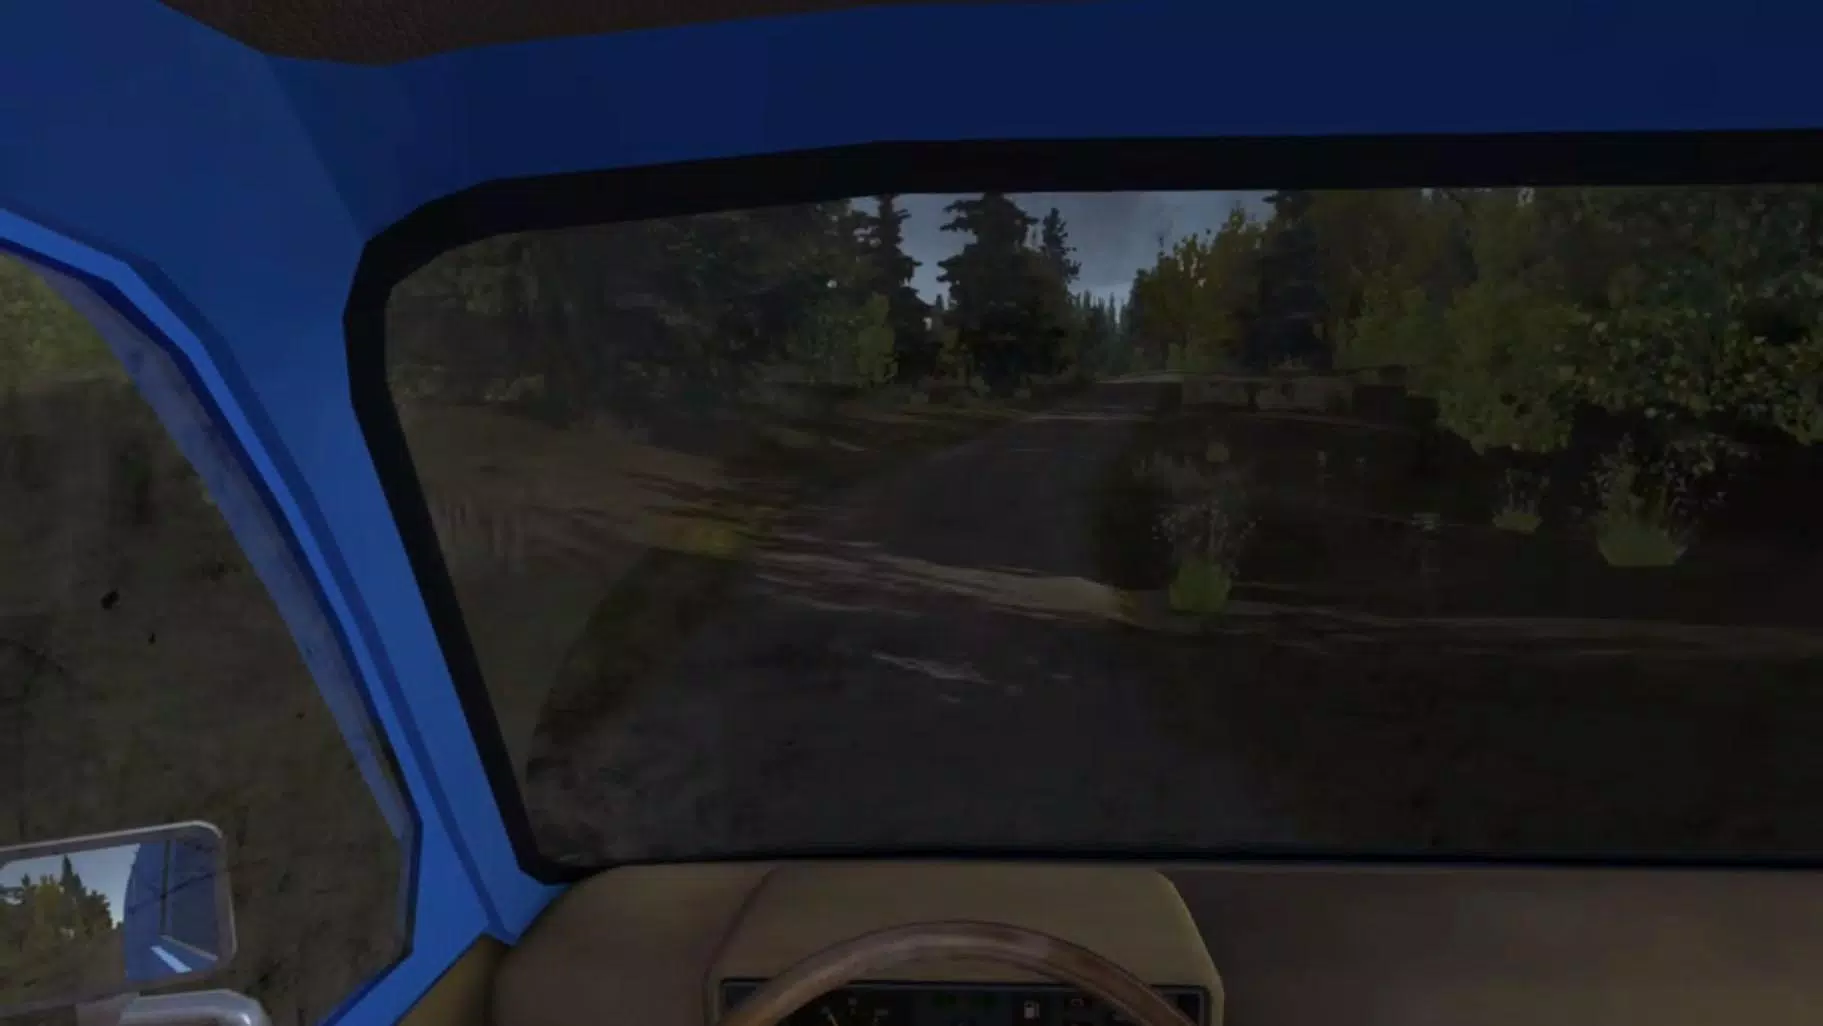 My Summer Car APK OBB Data File Download For Android